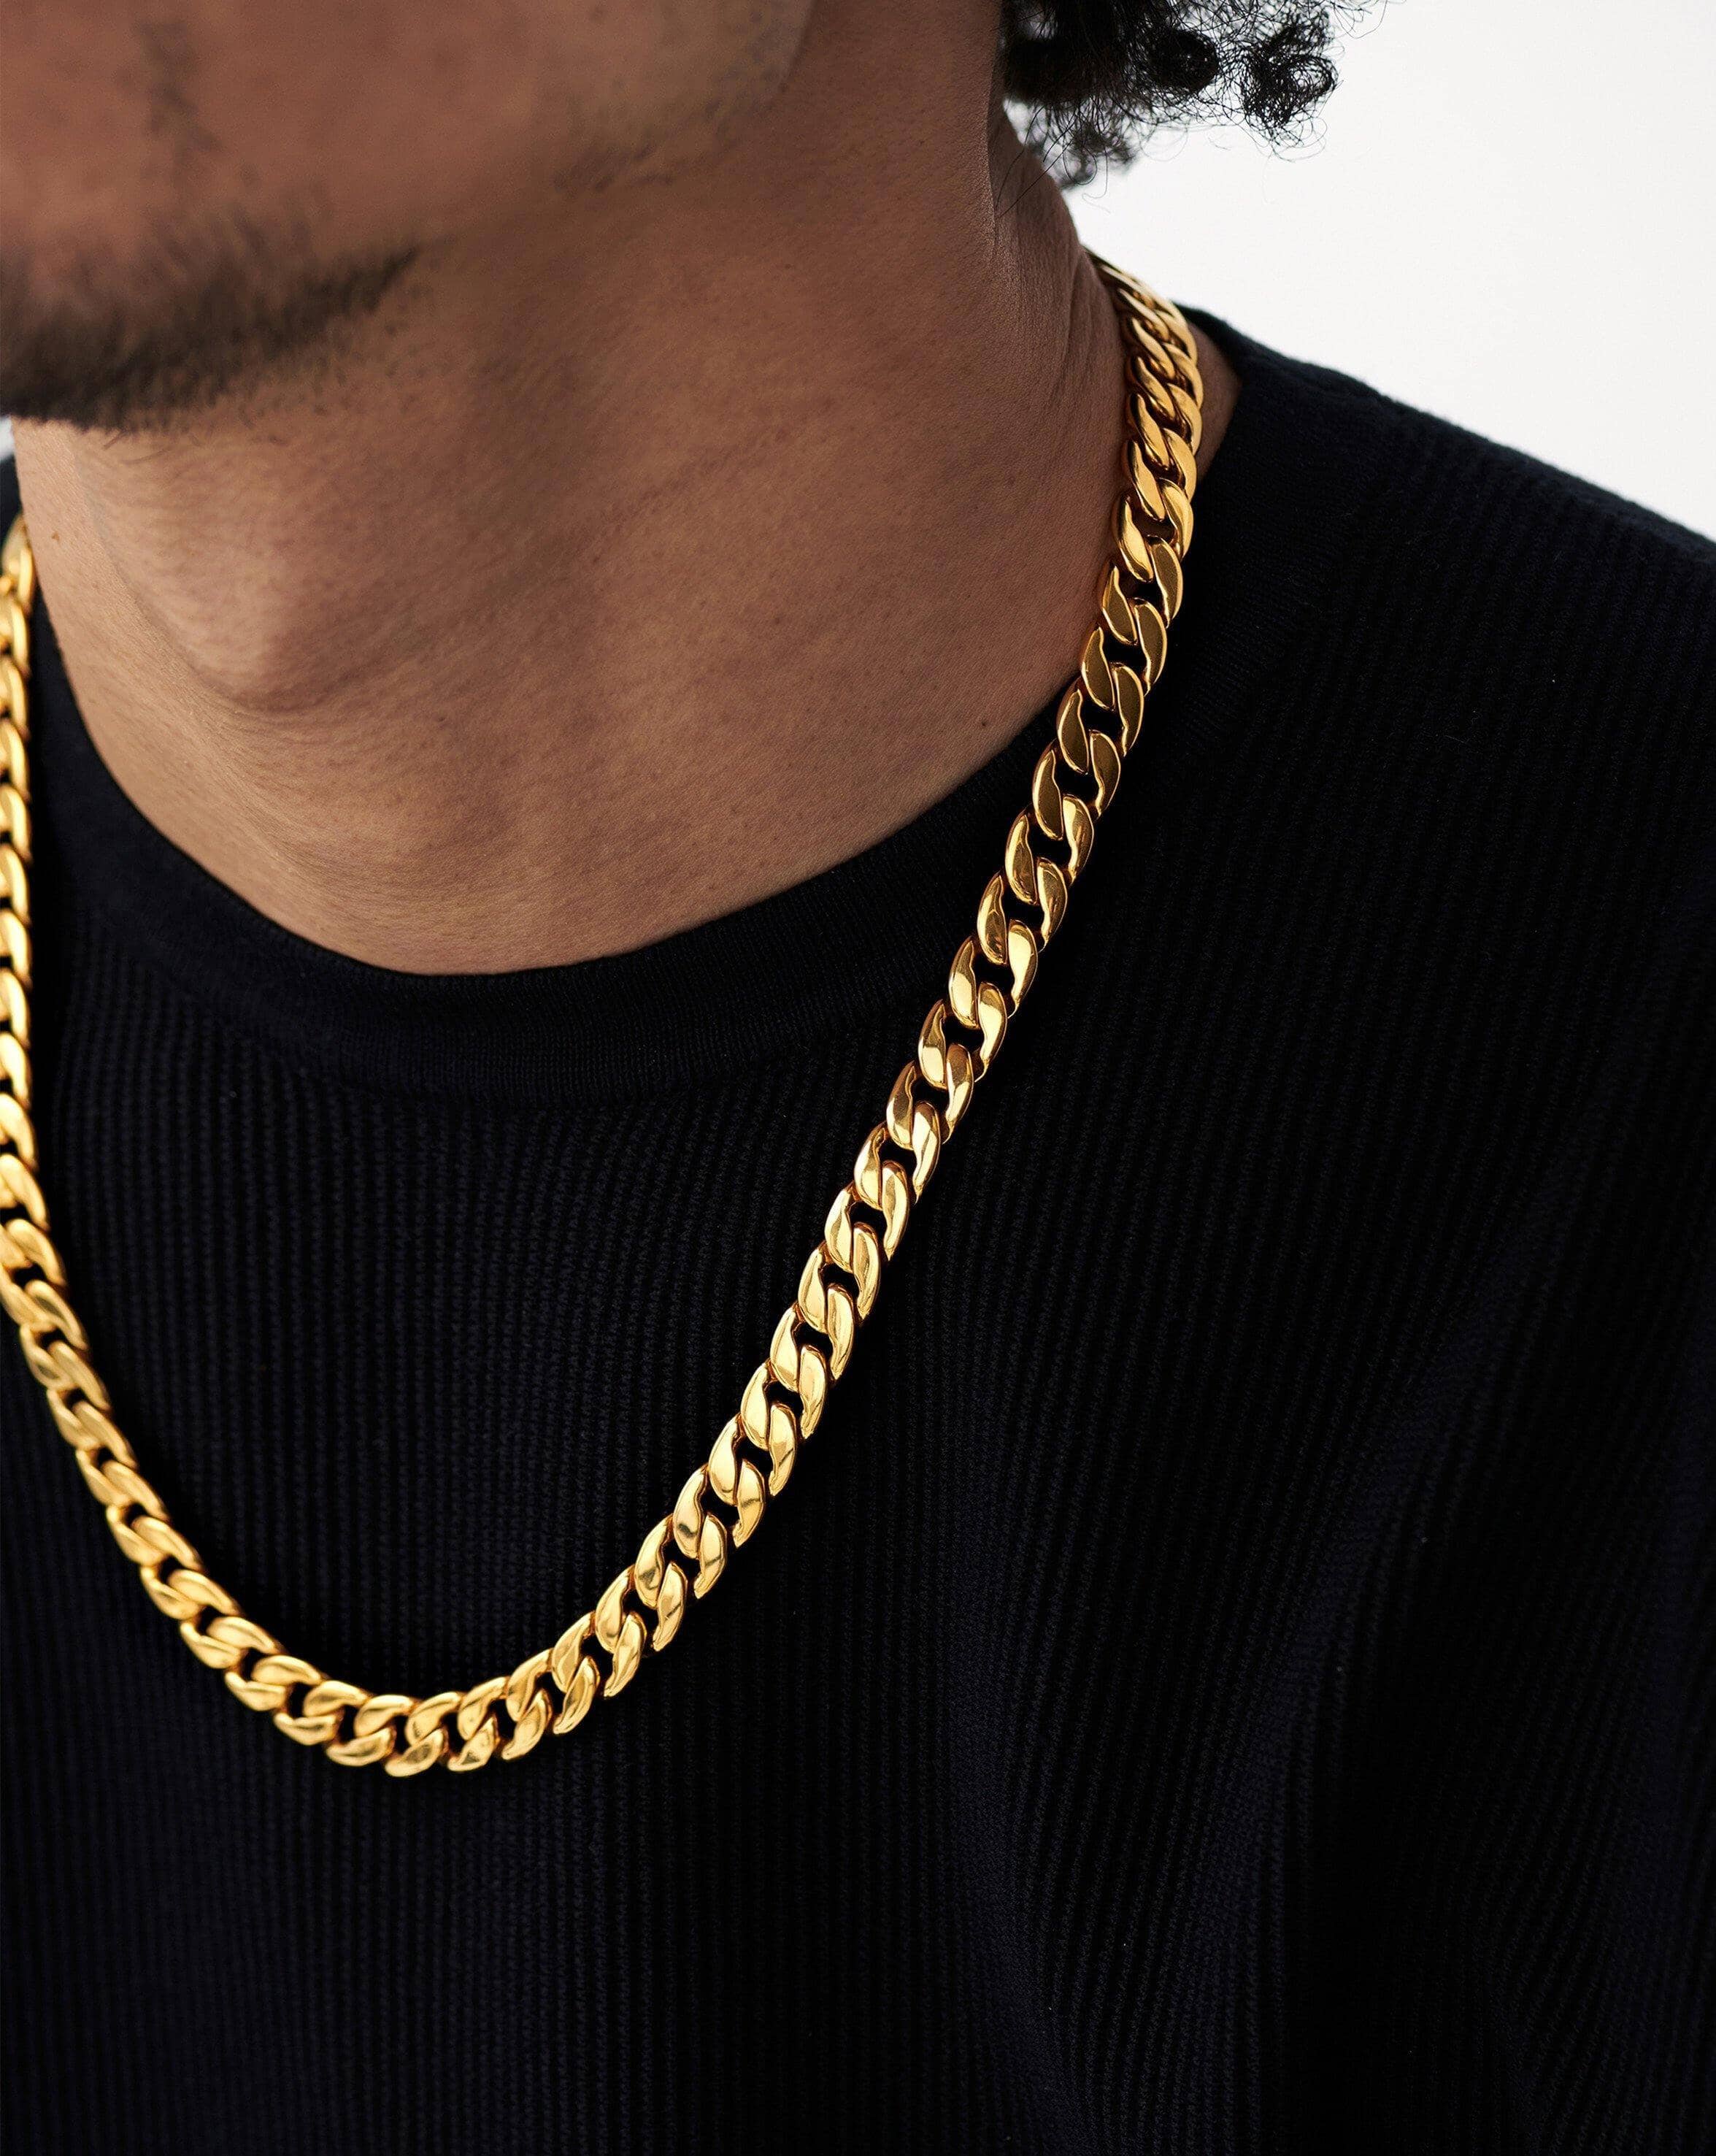 Men's 7.0mm Curb Chain Necklace in Hollow 14K Gold - 22